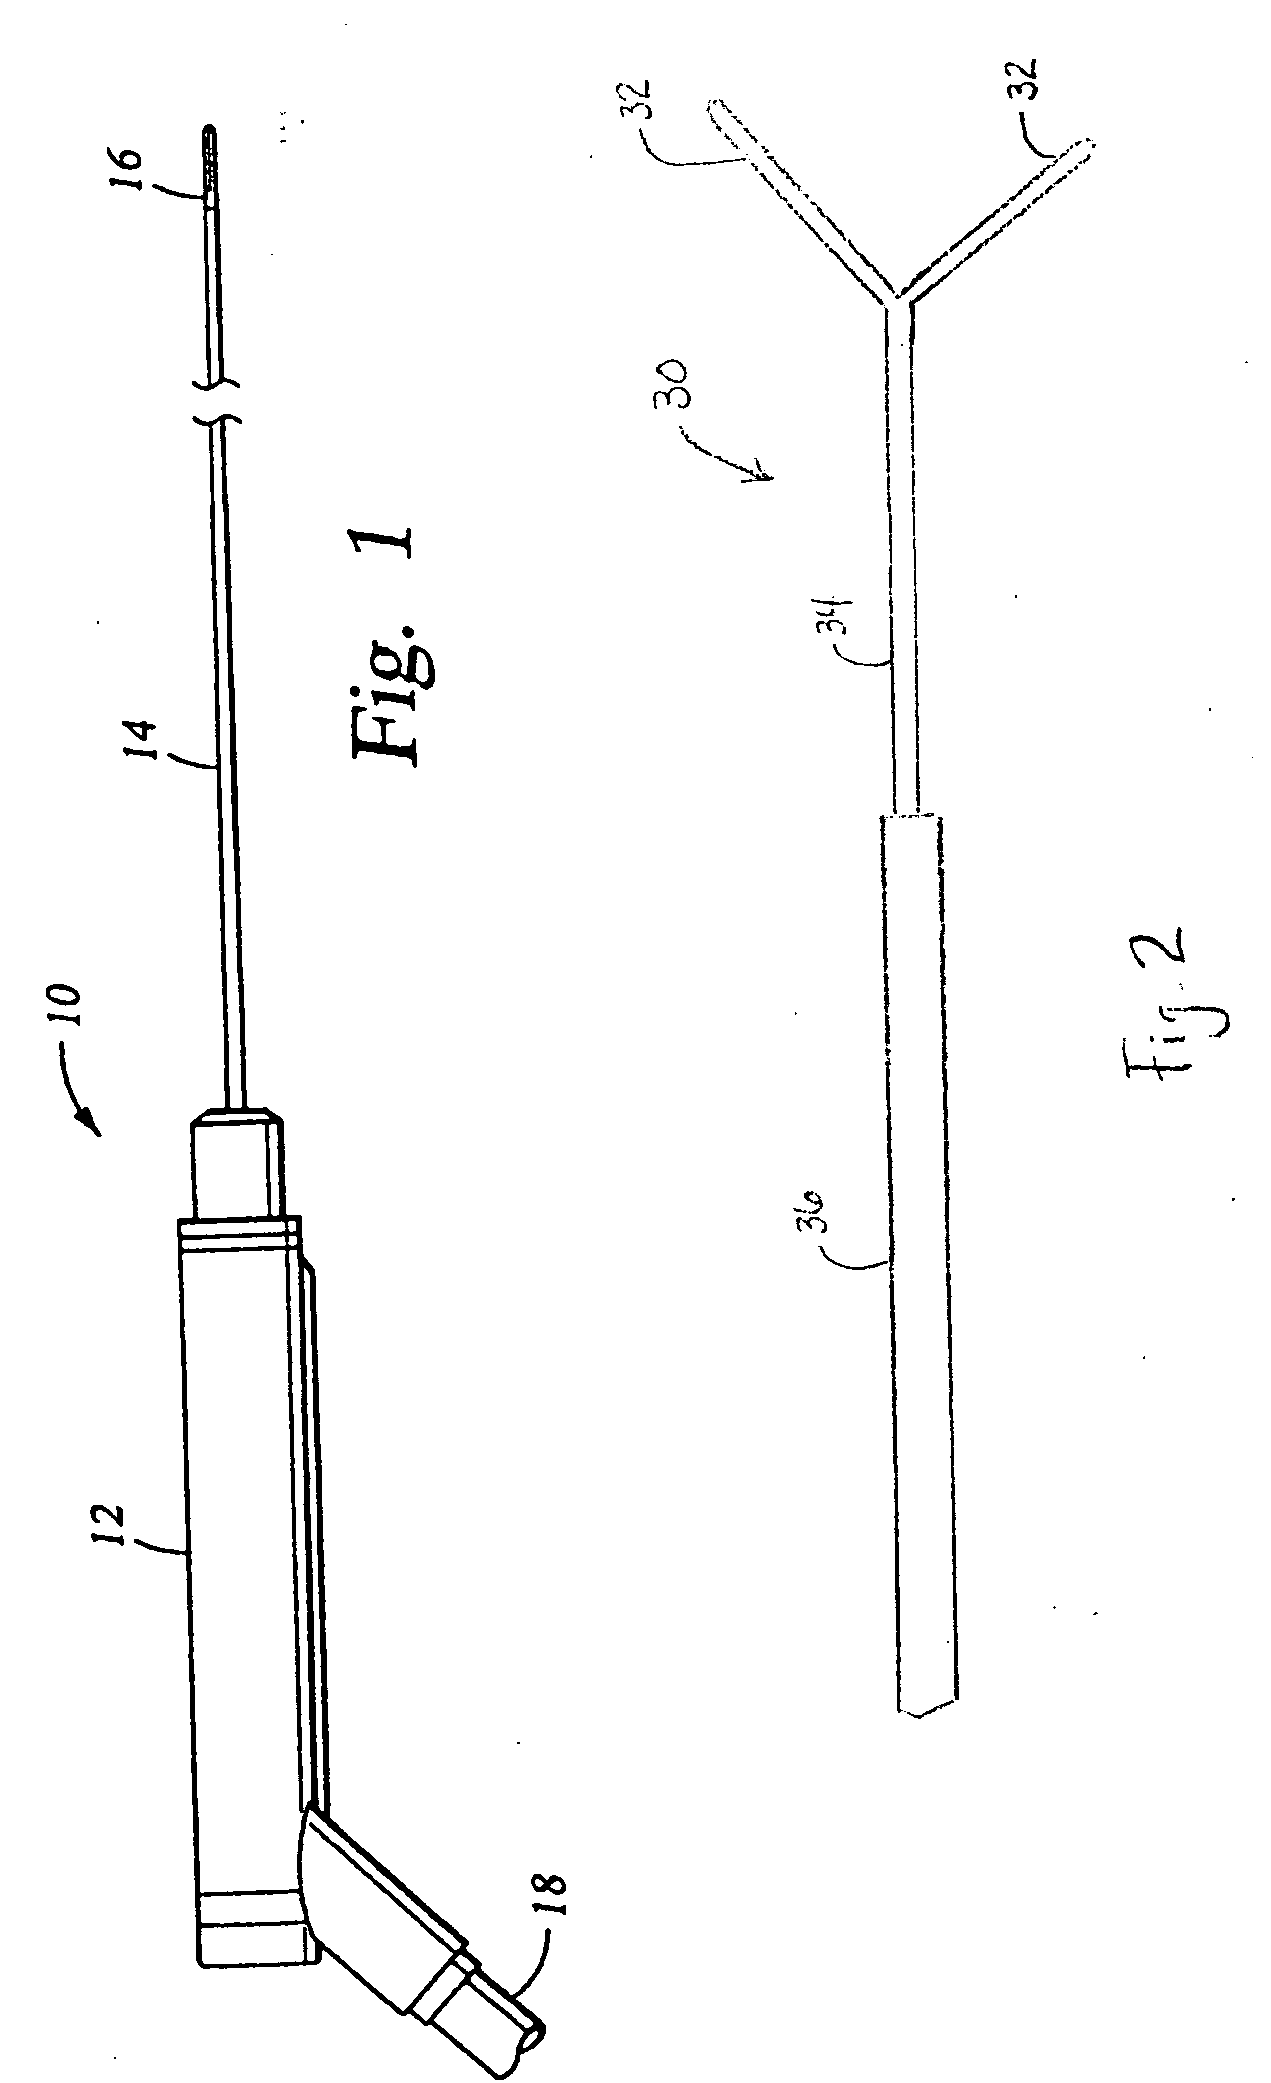 Cryosurgical devices and methods for endometrial ablation